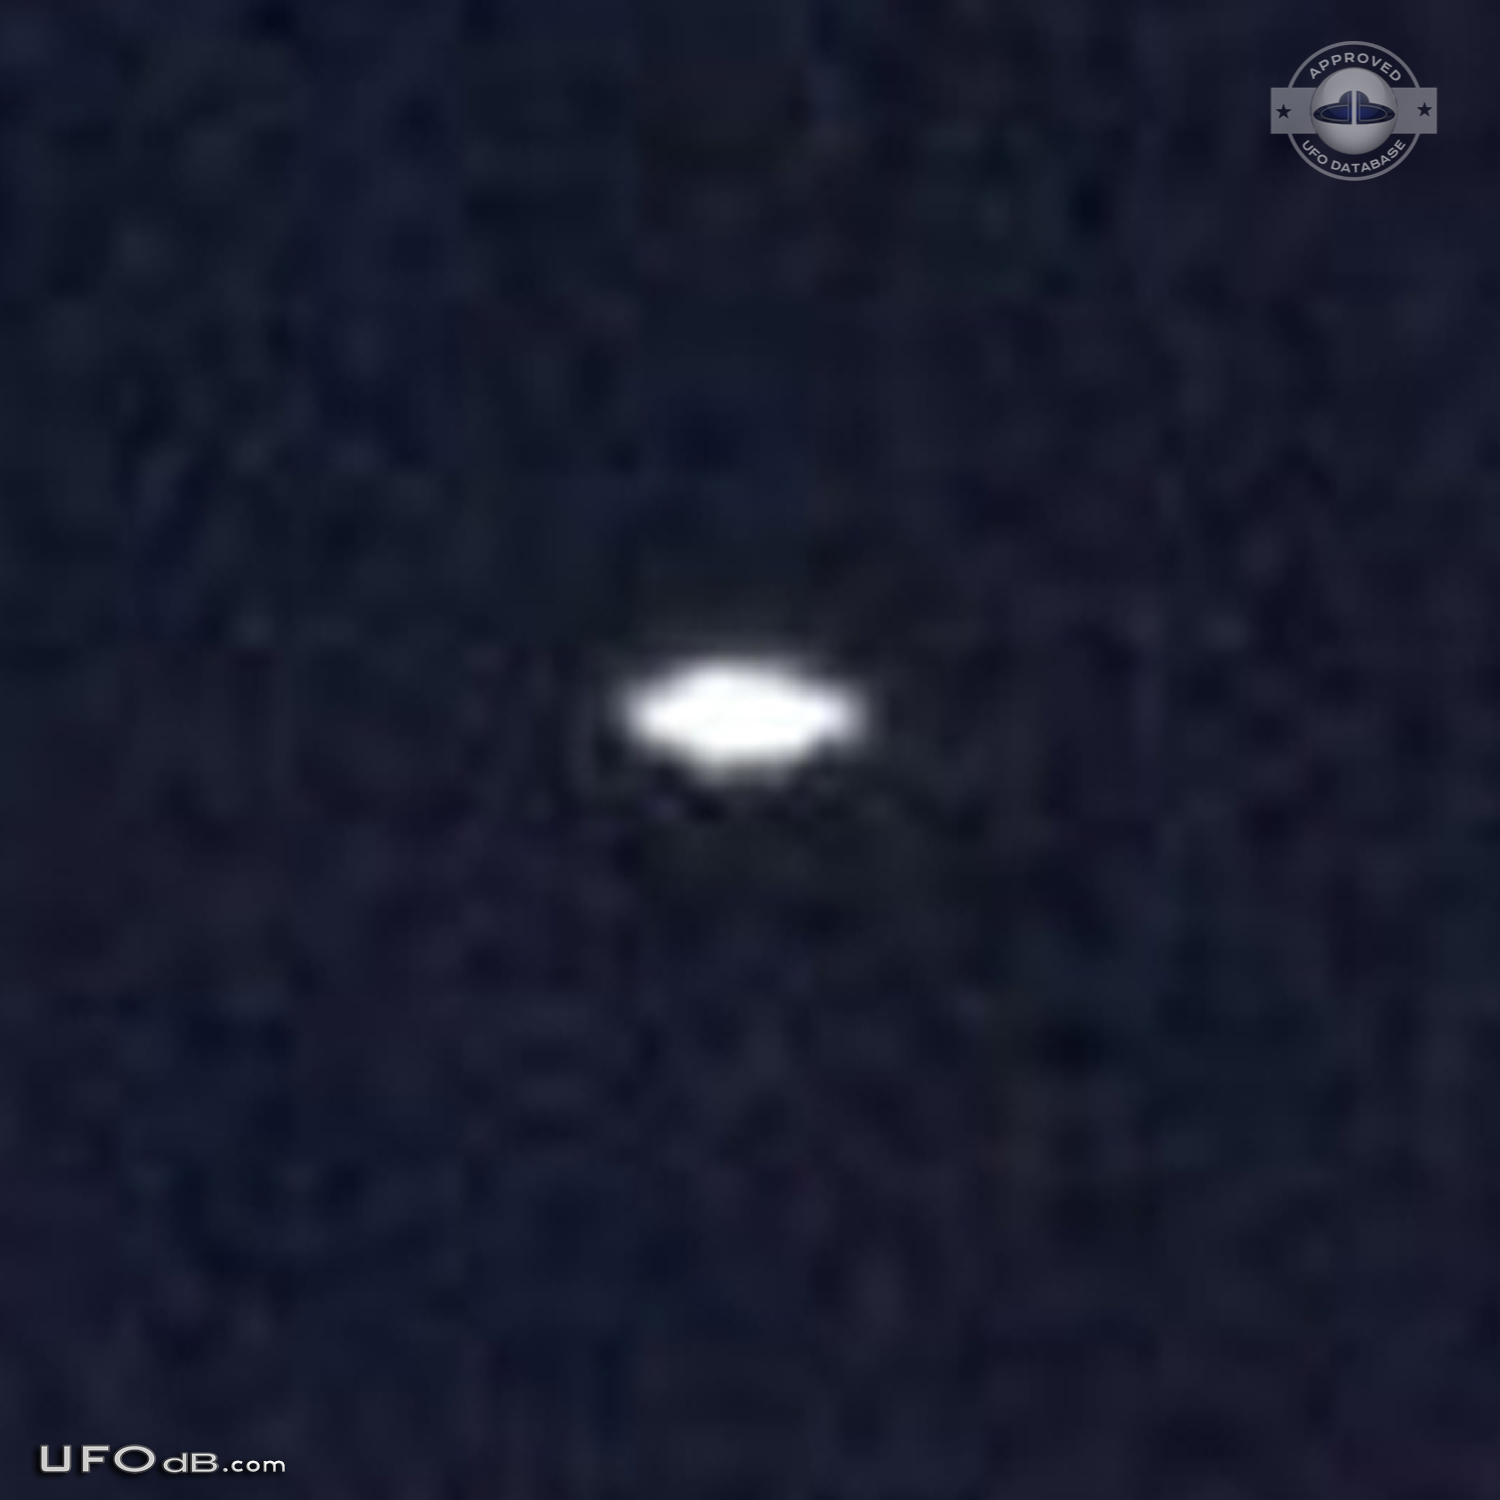 Saucer UFO picture seen over Euless Texas sent to TV station - 2013 UFO Picture #542-3